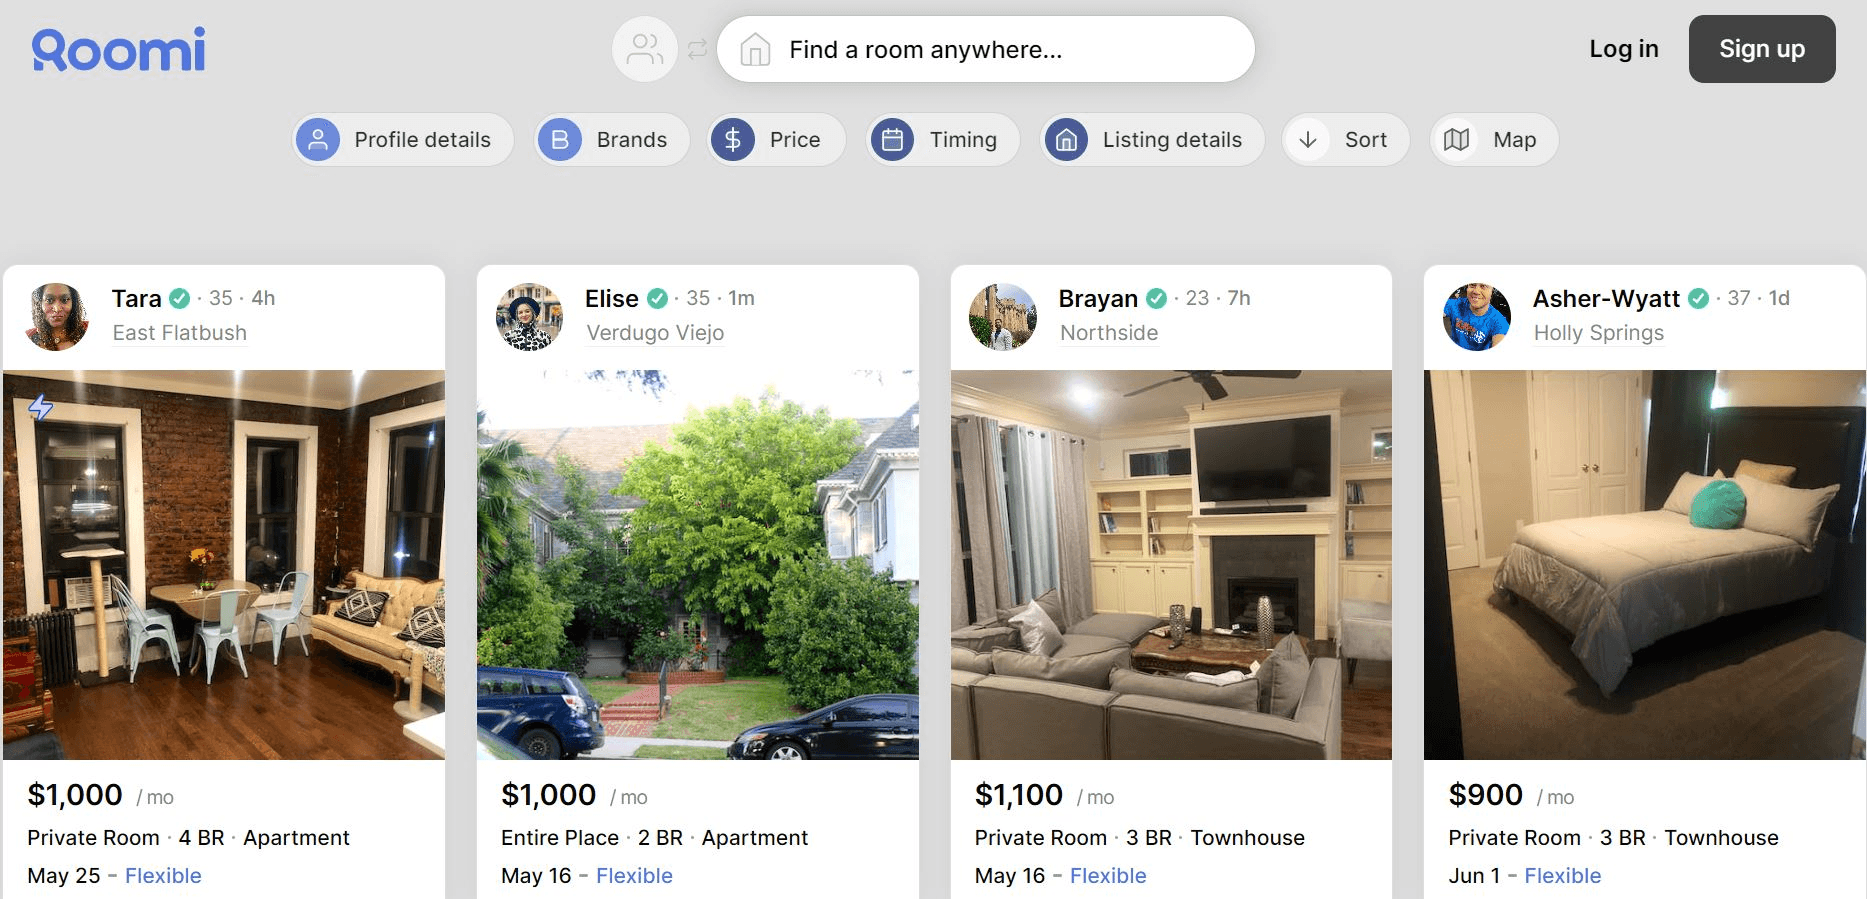 Find a roommate using Roomi